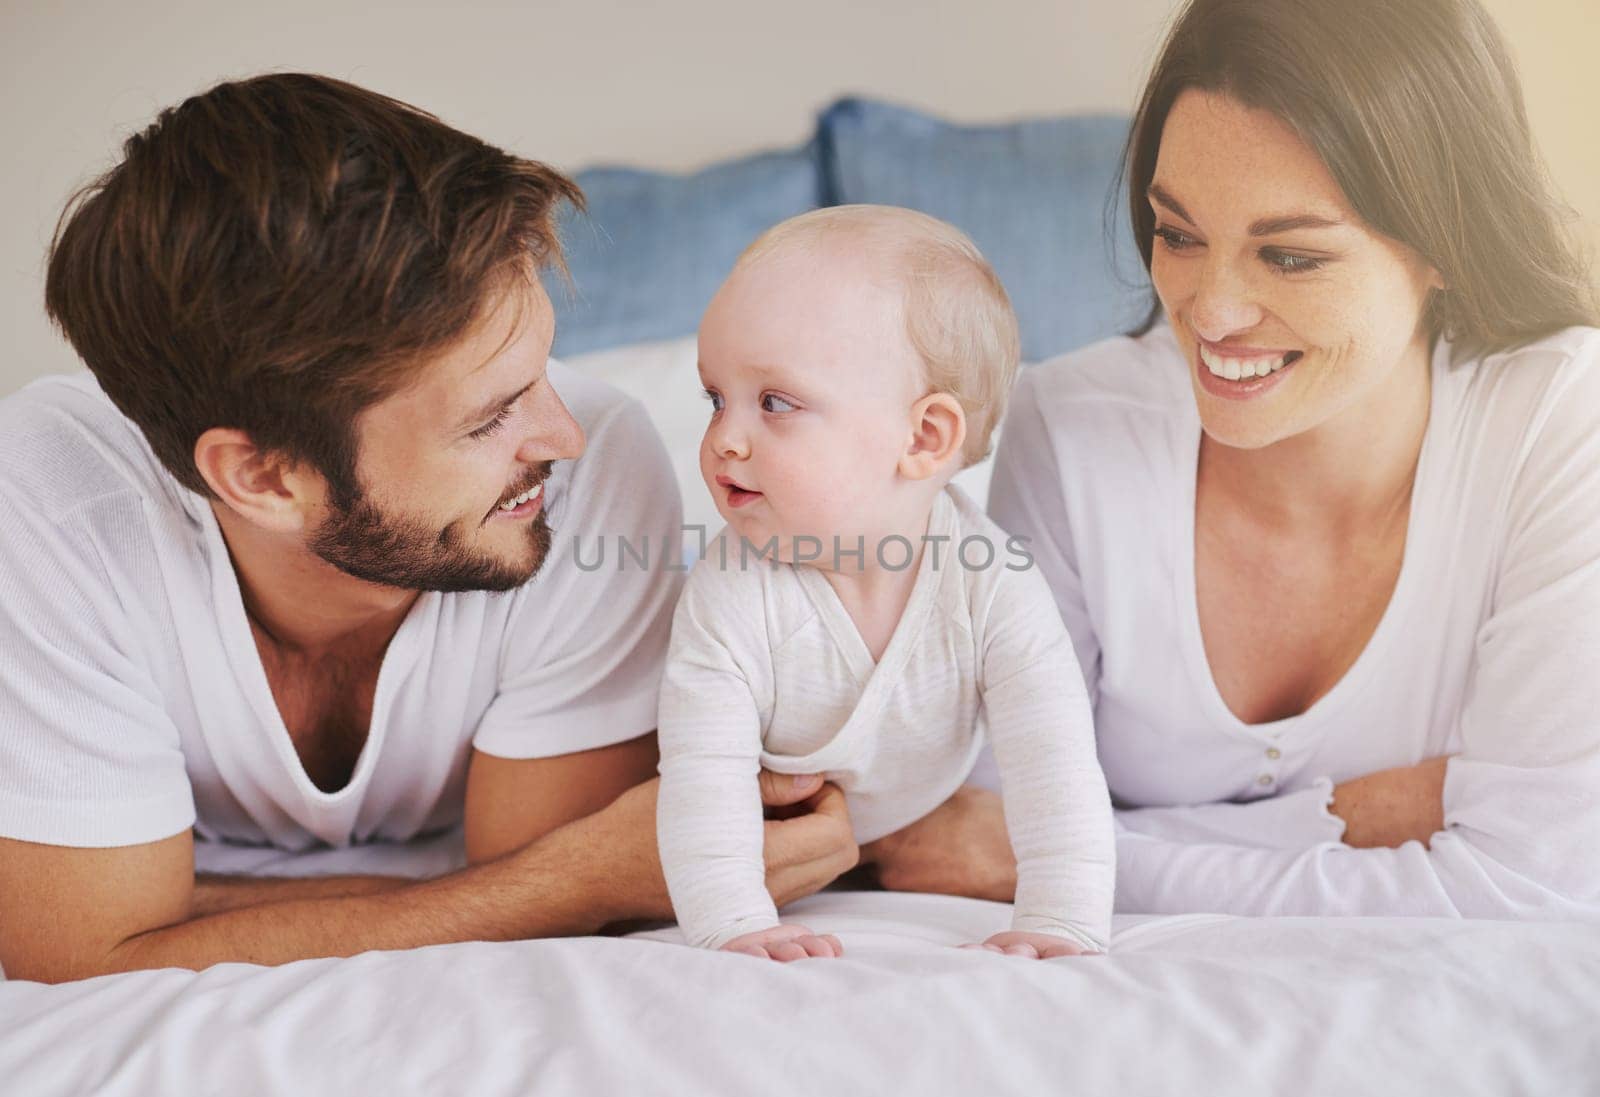 Happy family, mother and father with baby on bed for love, care and quality time together at home. Mom, dad and cute newborn child relaxing in bedroom for happiness, support and development of kids.